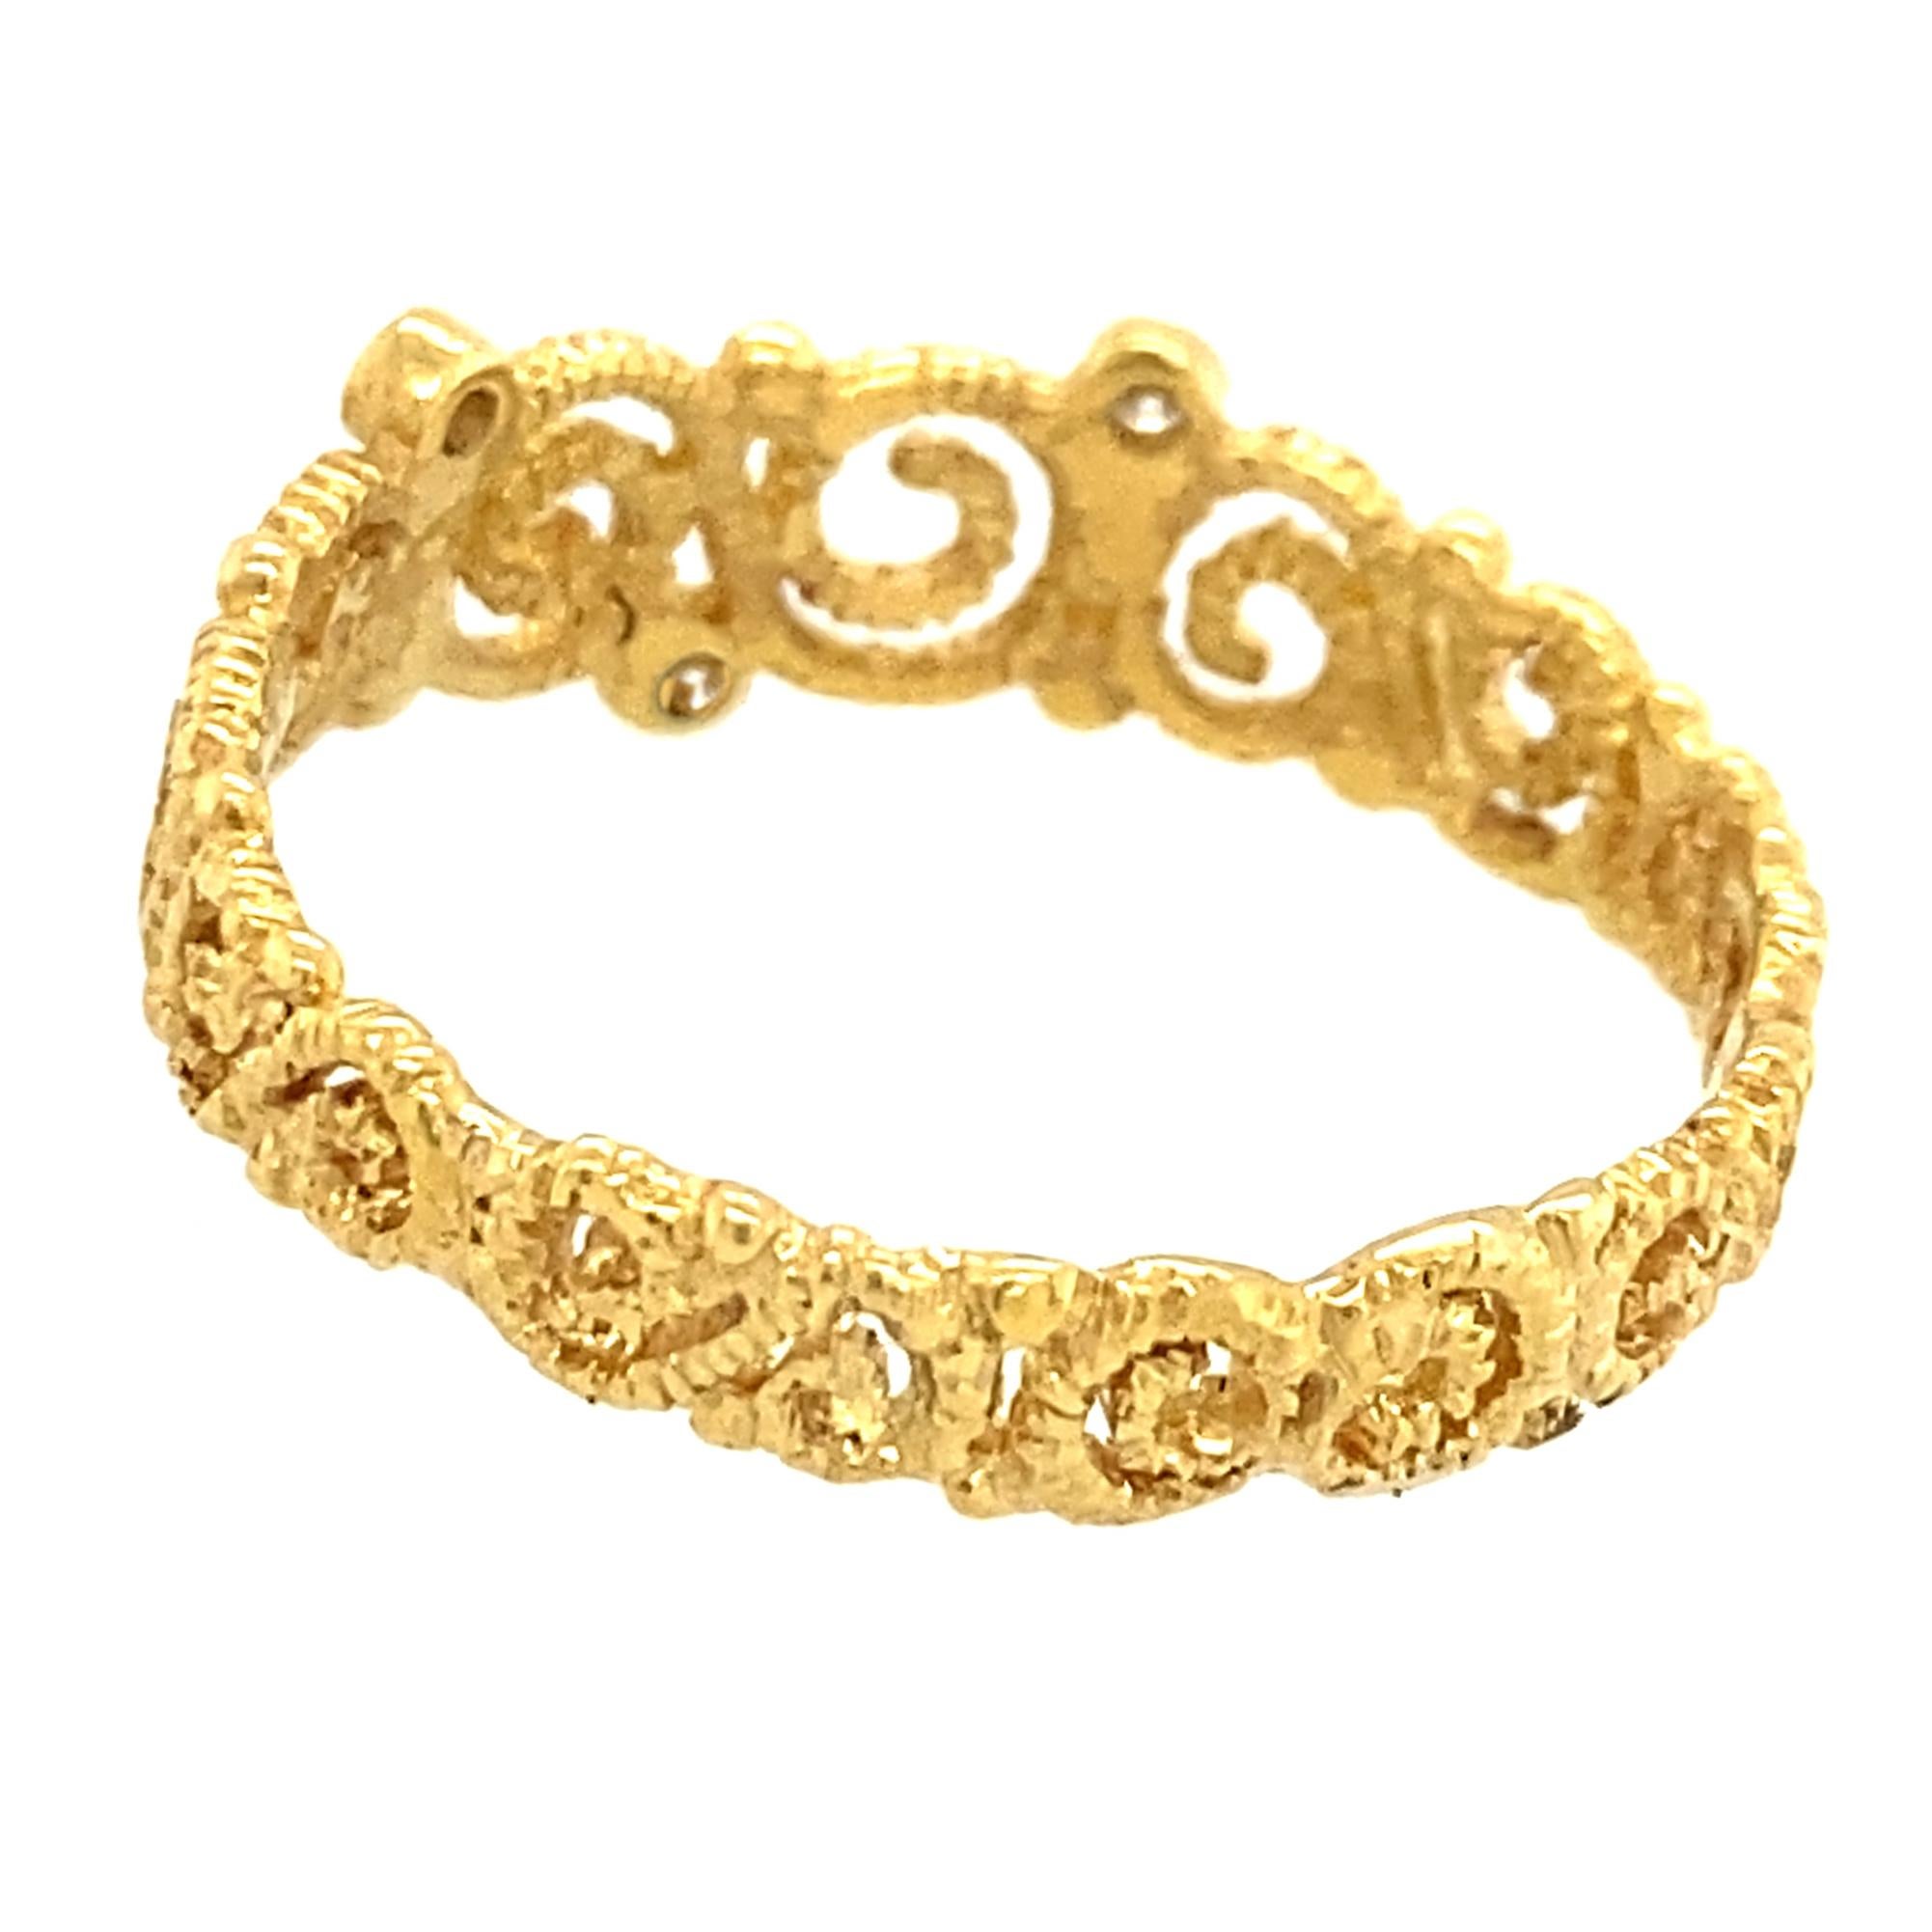 Open Scrollwork Band in 18 Karat Yellow Gold with Diamond Accents 4